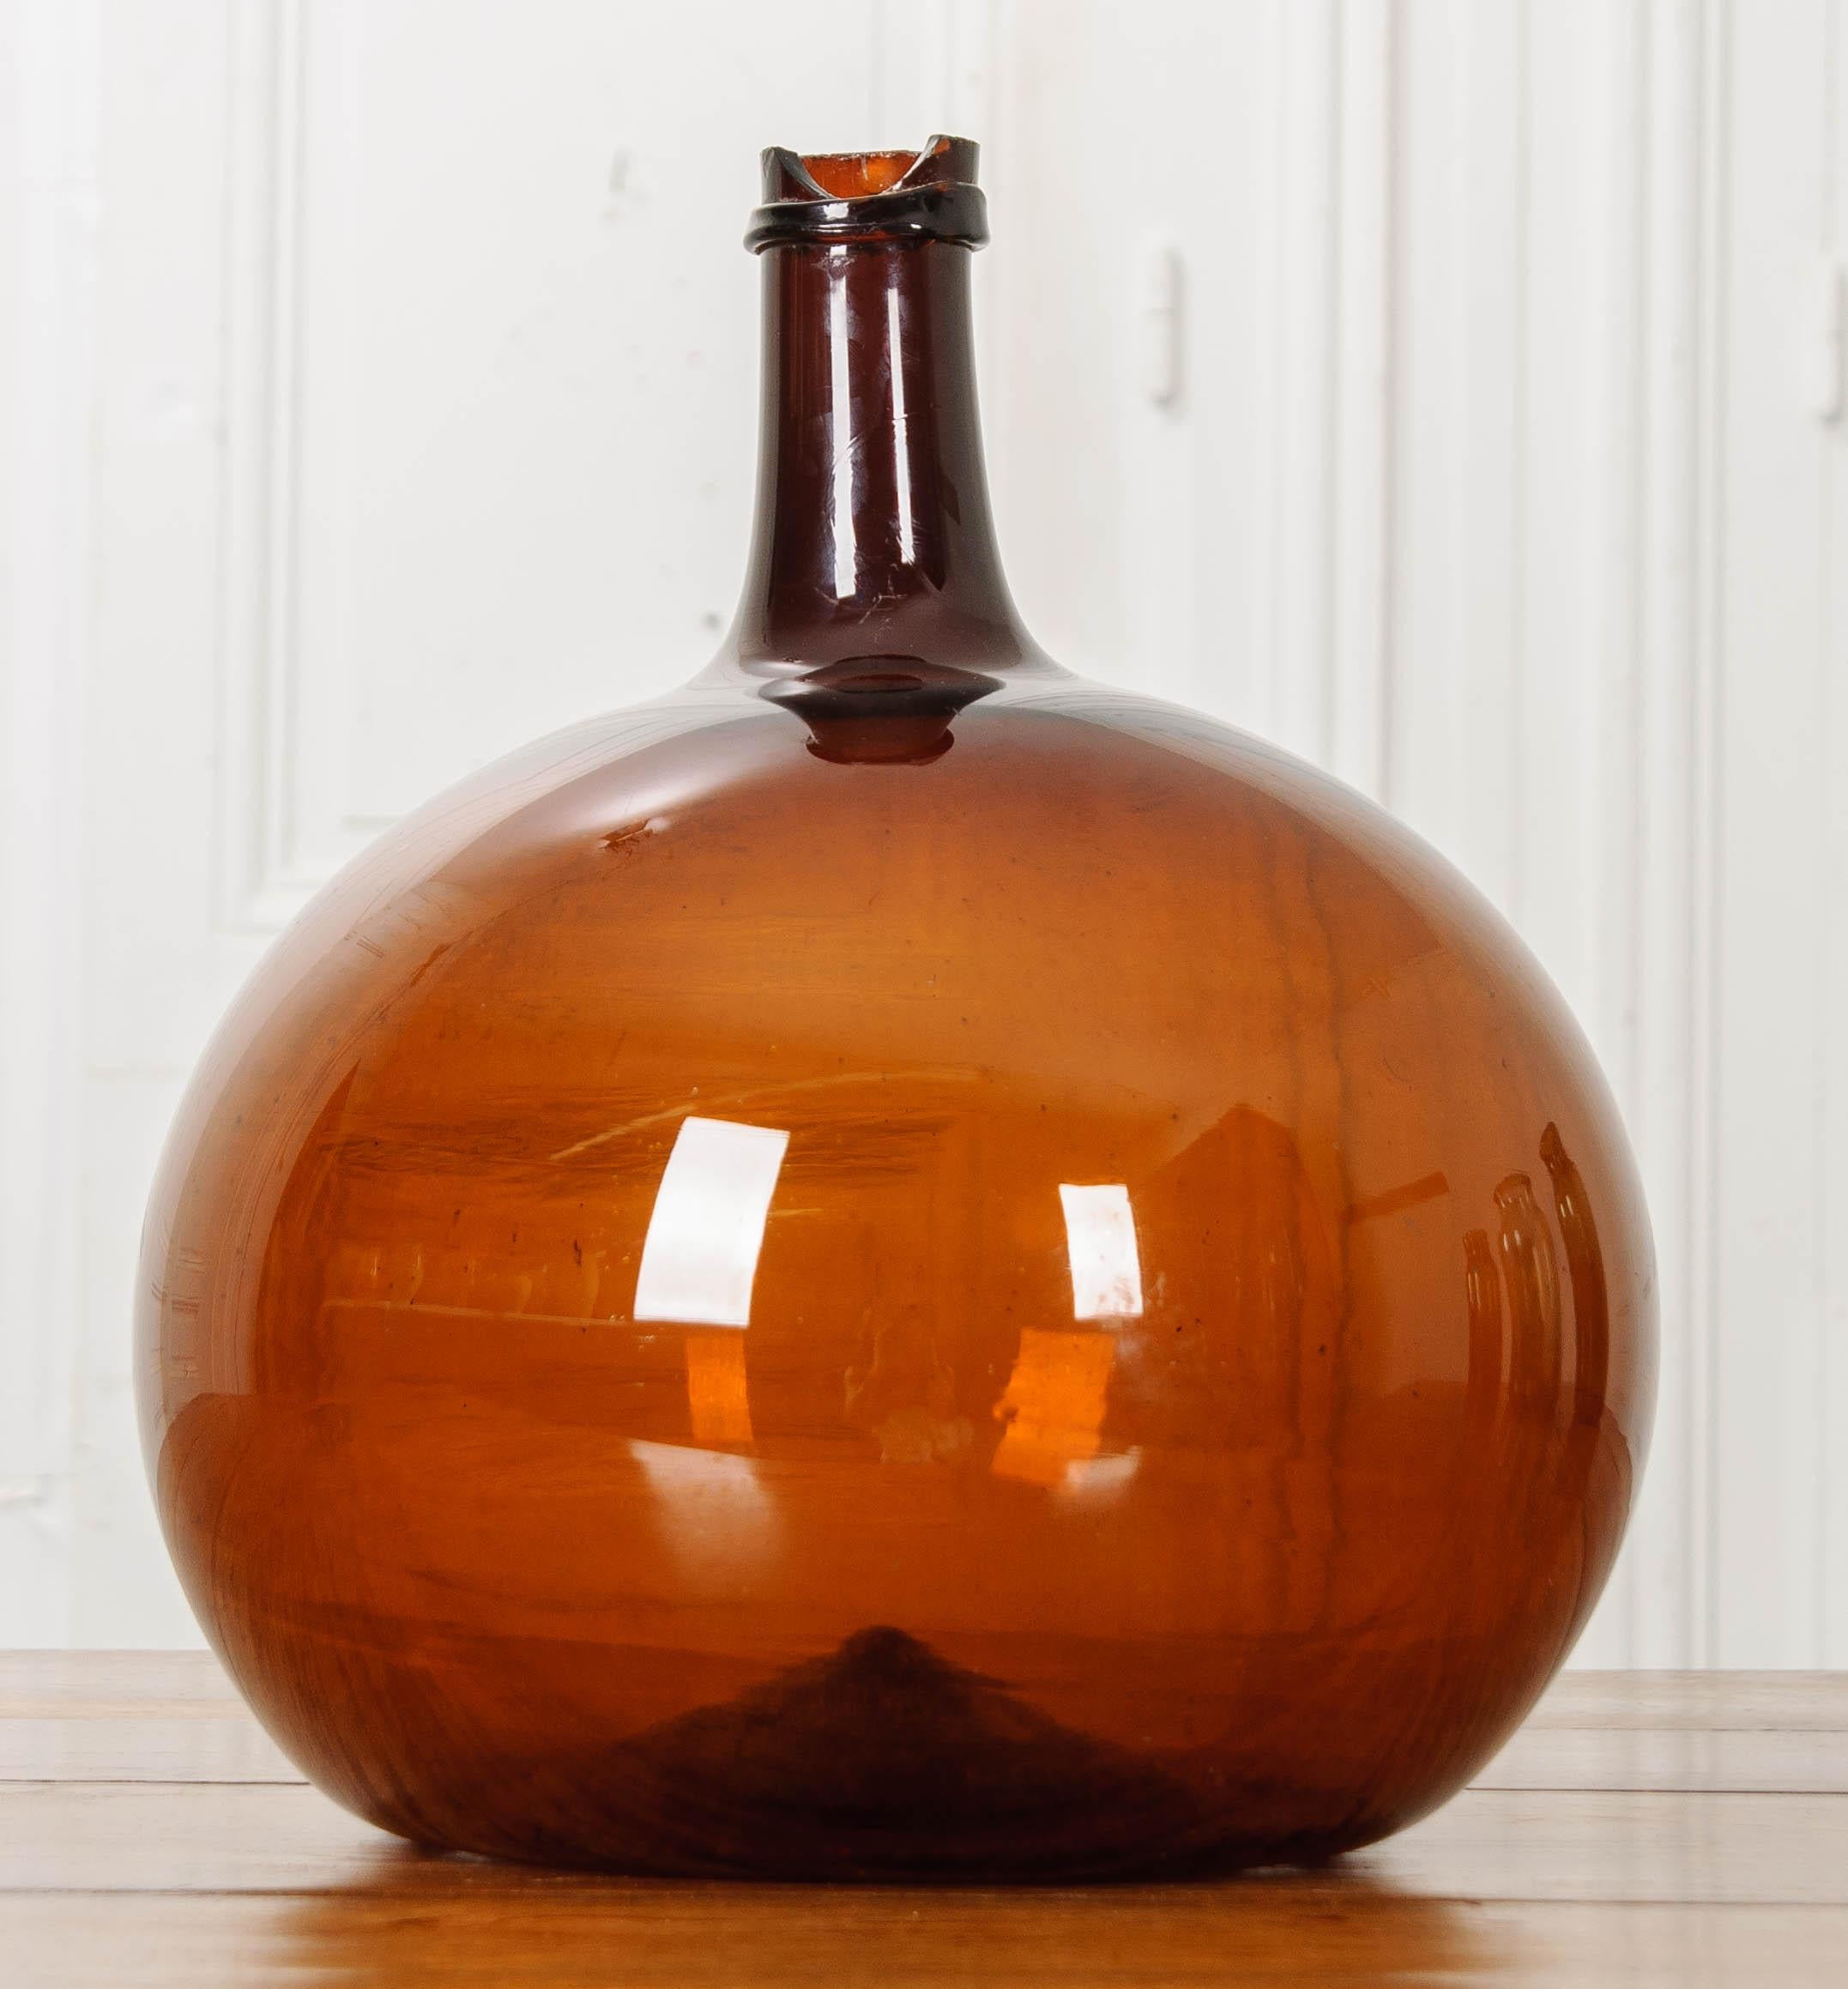 Before the days of individually bottled wine, and even longer before boxed wine, oenophiles (wine lovers) would fill large glass kegs from a merchant and brought home for consumption. This smaller wine keg was made in England, circa 1790 of